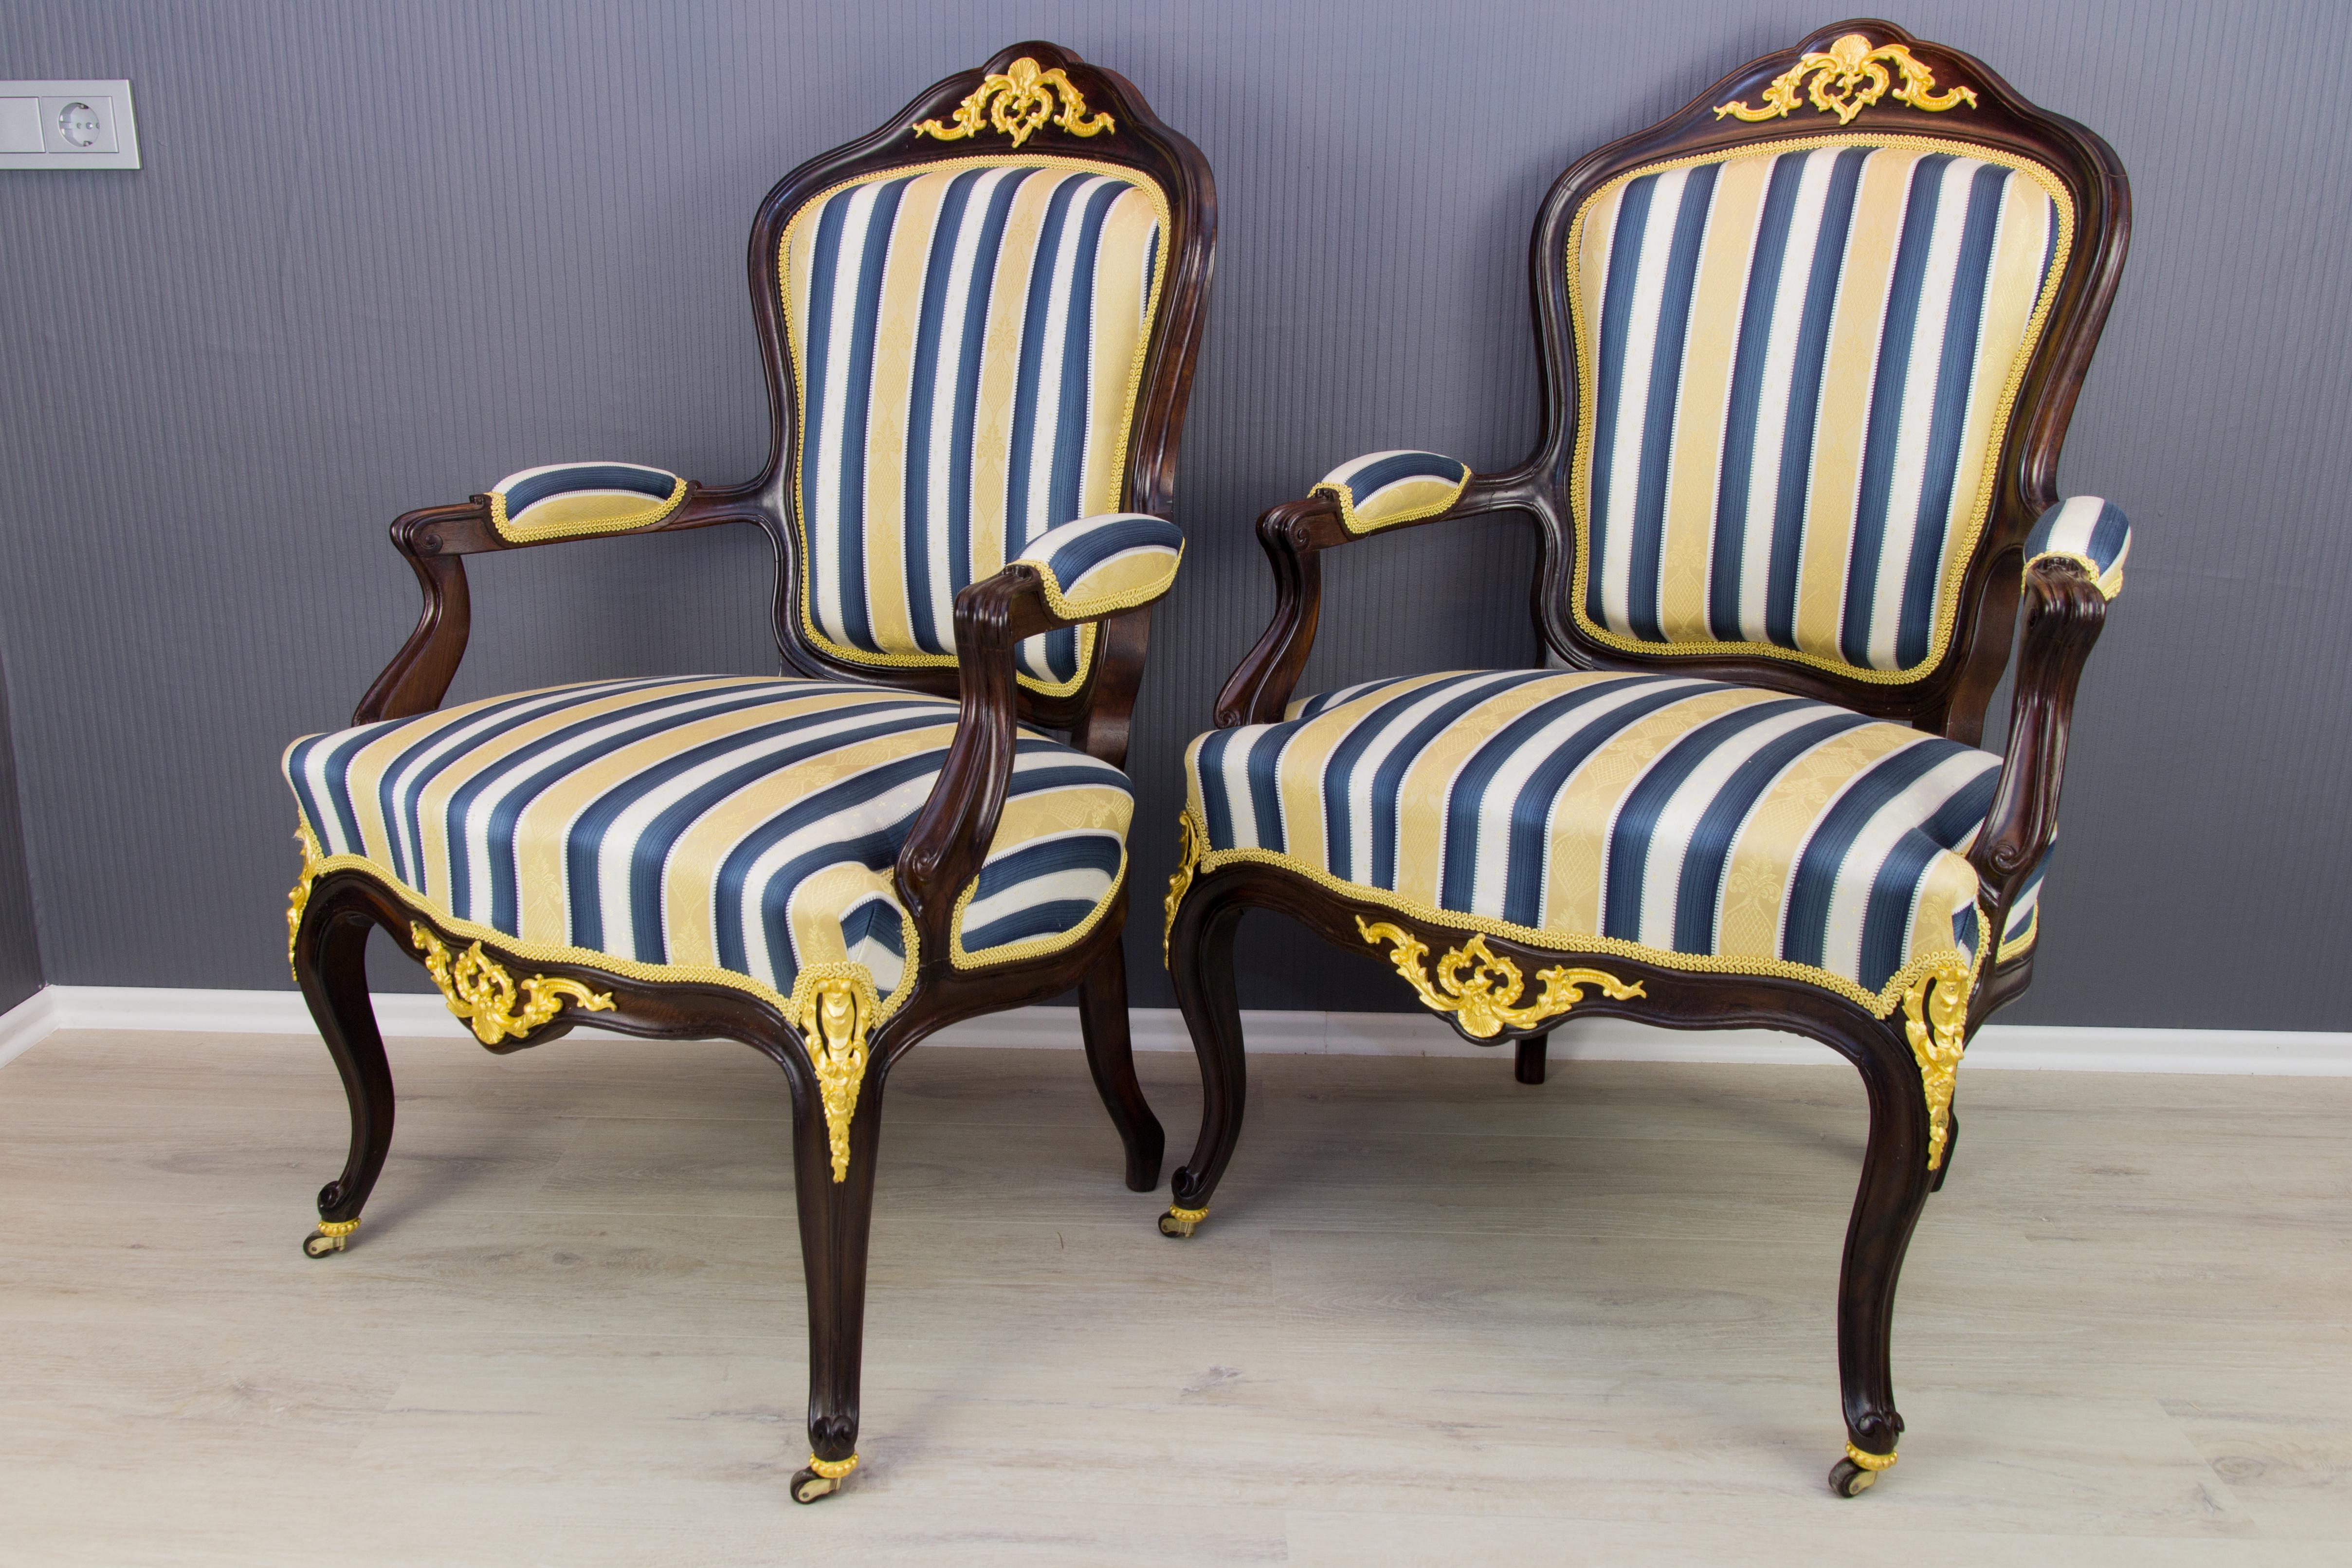 Pair of 19th Century Louis XV Style Walnut Armchairs in Golden, Blue, and White  For Sale 12